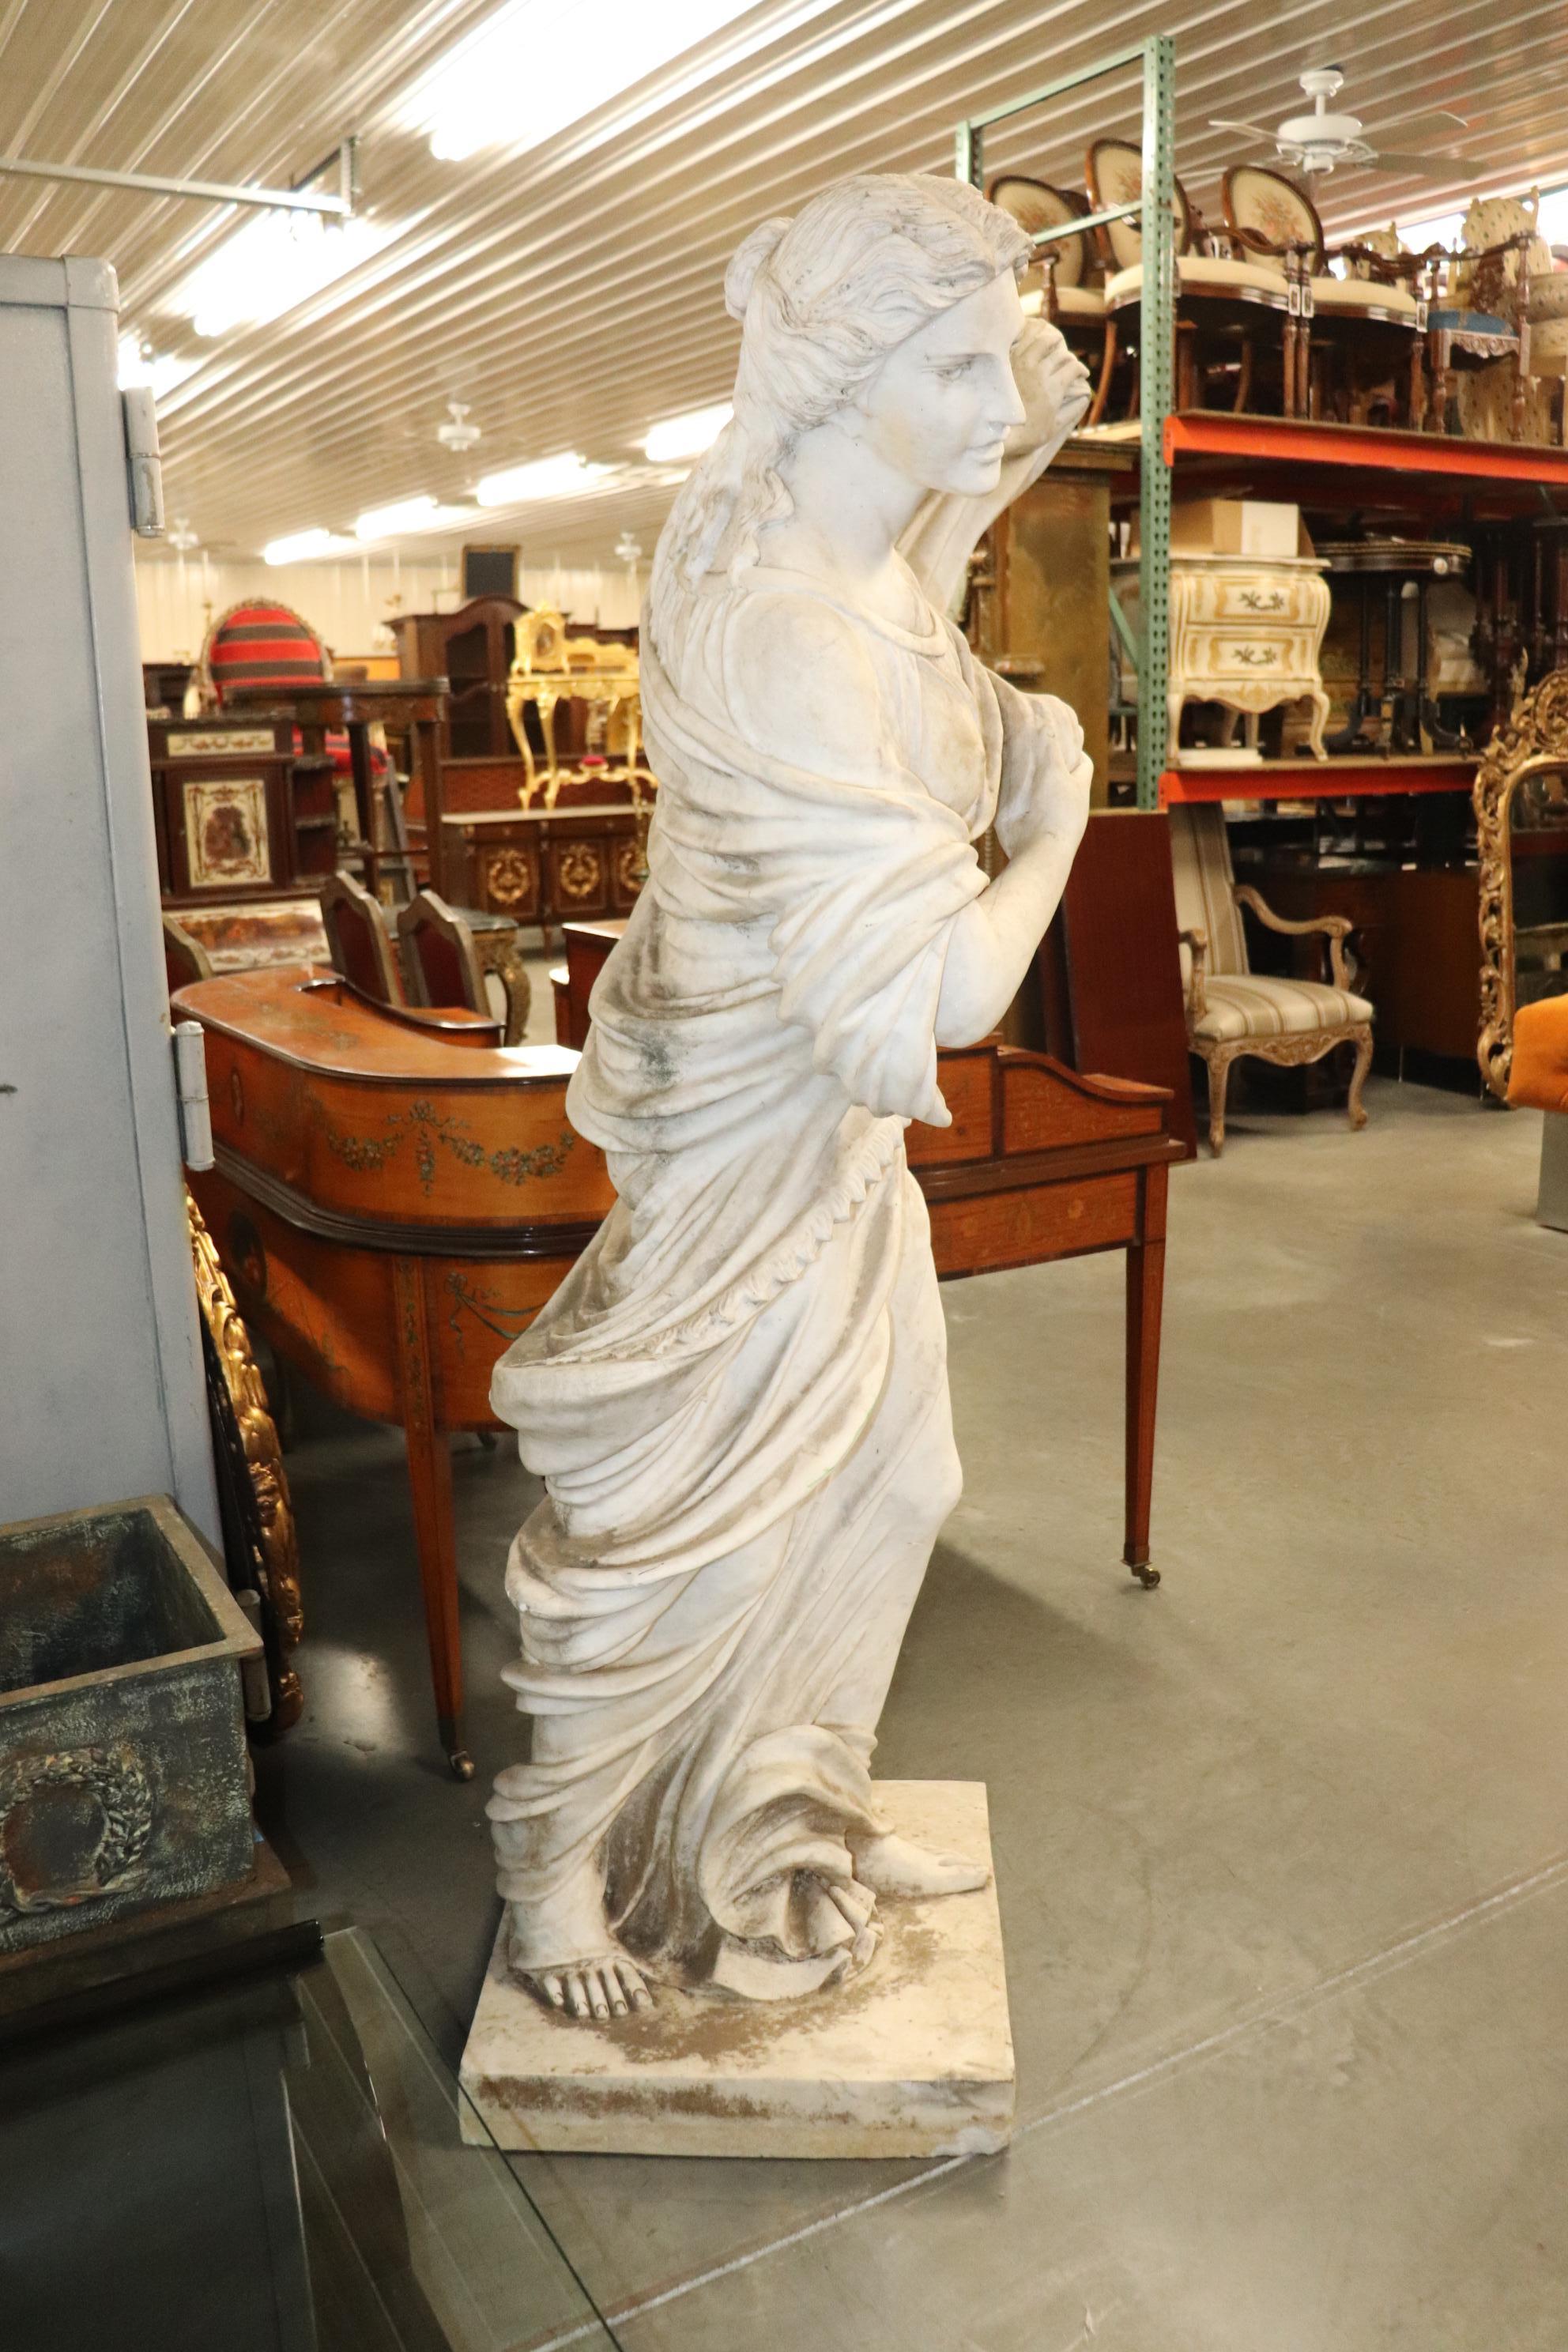 This is a superbly crafted Victorian era Italian made statue of carara marble of a maiden with her dress being blown by the wind. The feeling of movement and the carving is of the highest quality. Look at the toes and fingers, and the beautiful